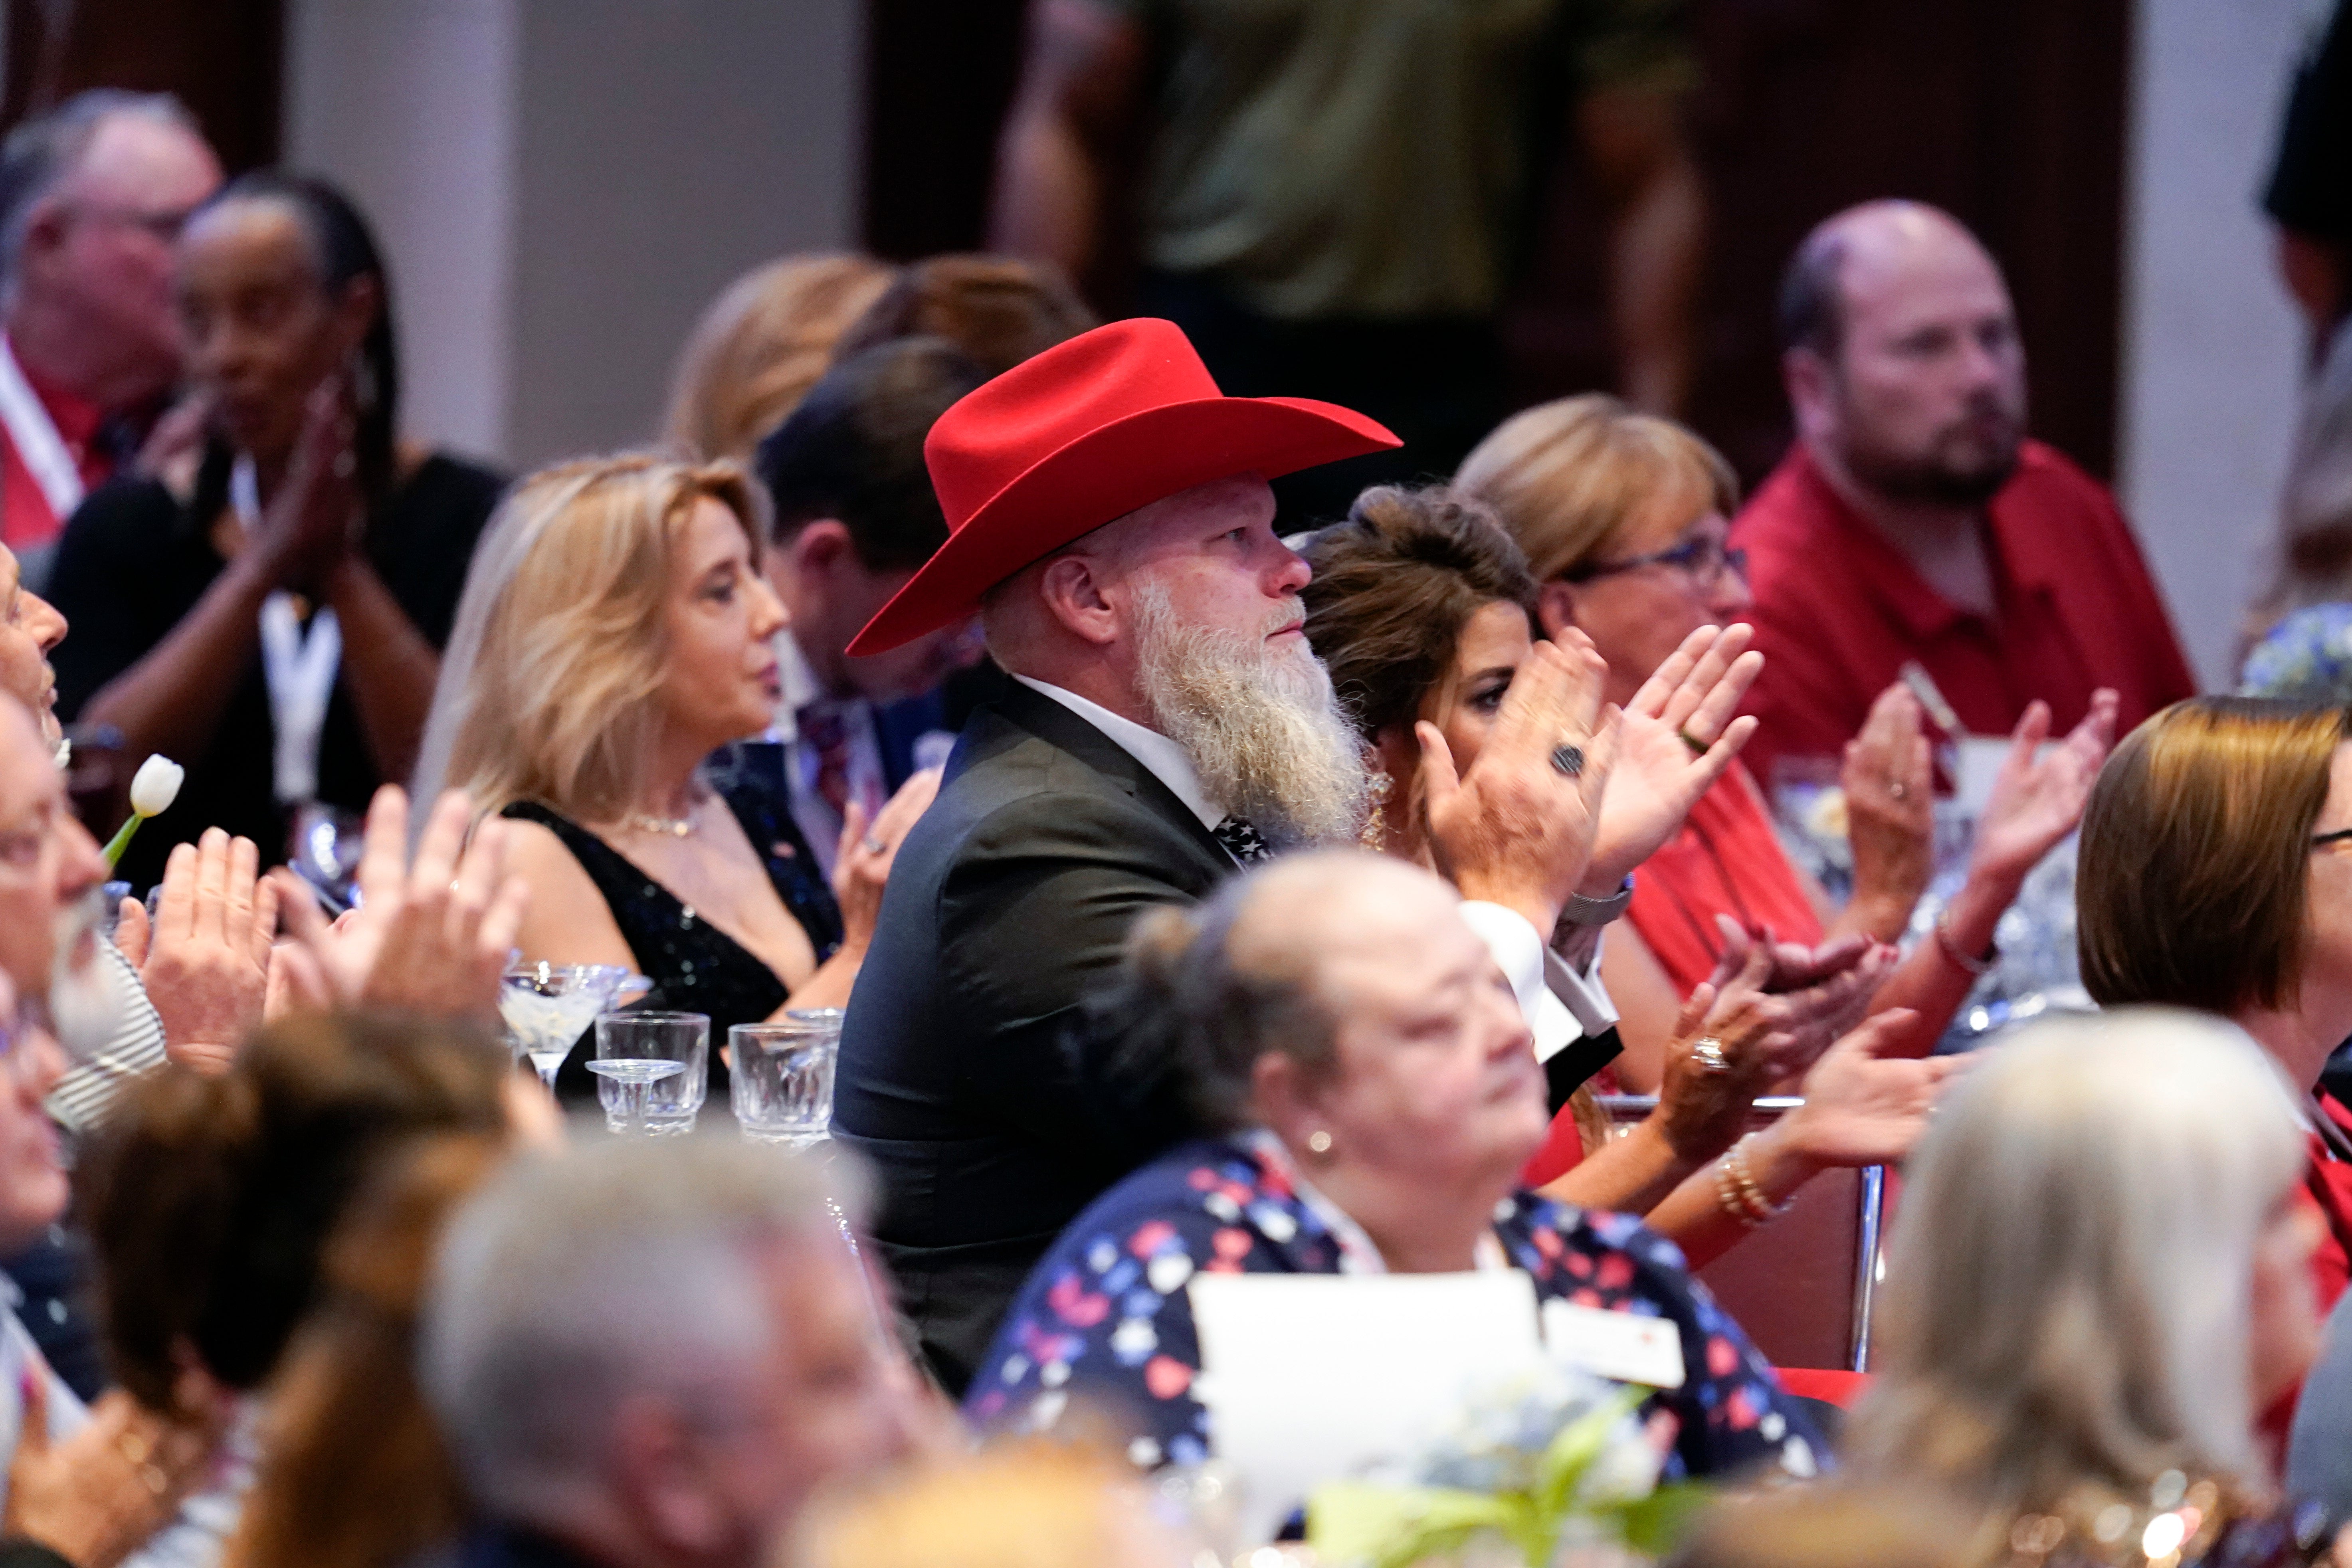 People applaud as former President Donald Trump speaks during the North Carolina Republican Party Convention in Greensboro, N.C., Saturday, June 10, 2023. (AP Photo/George Walker IV)